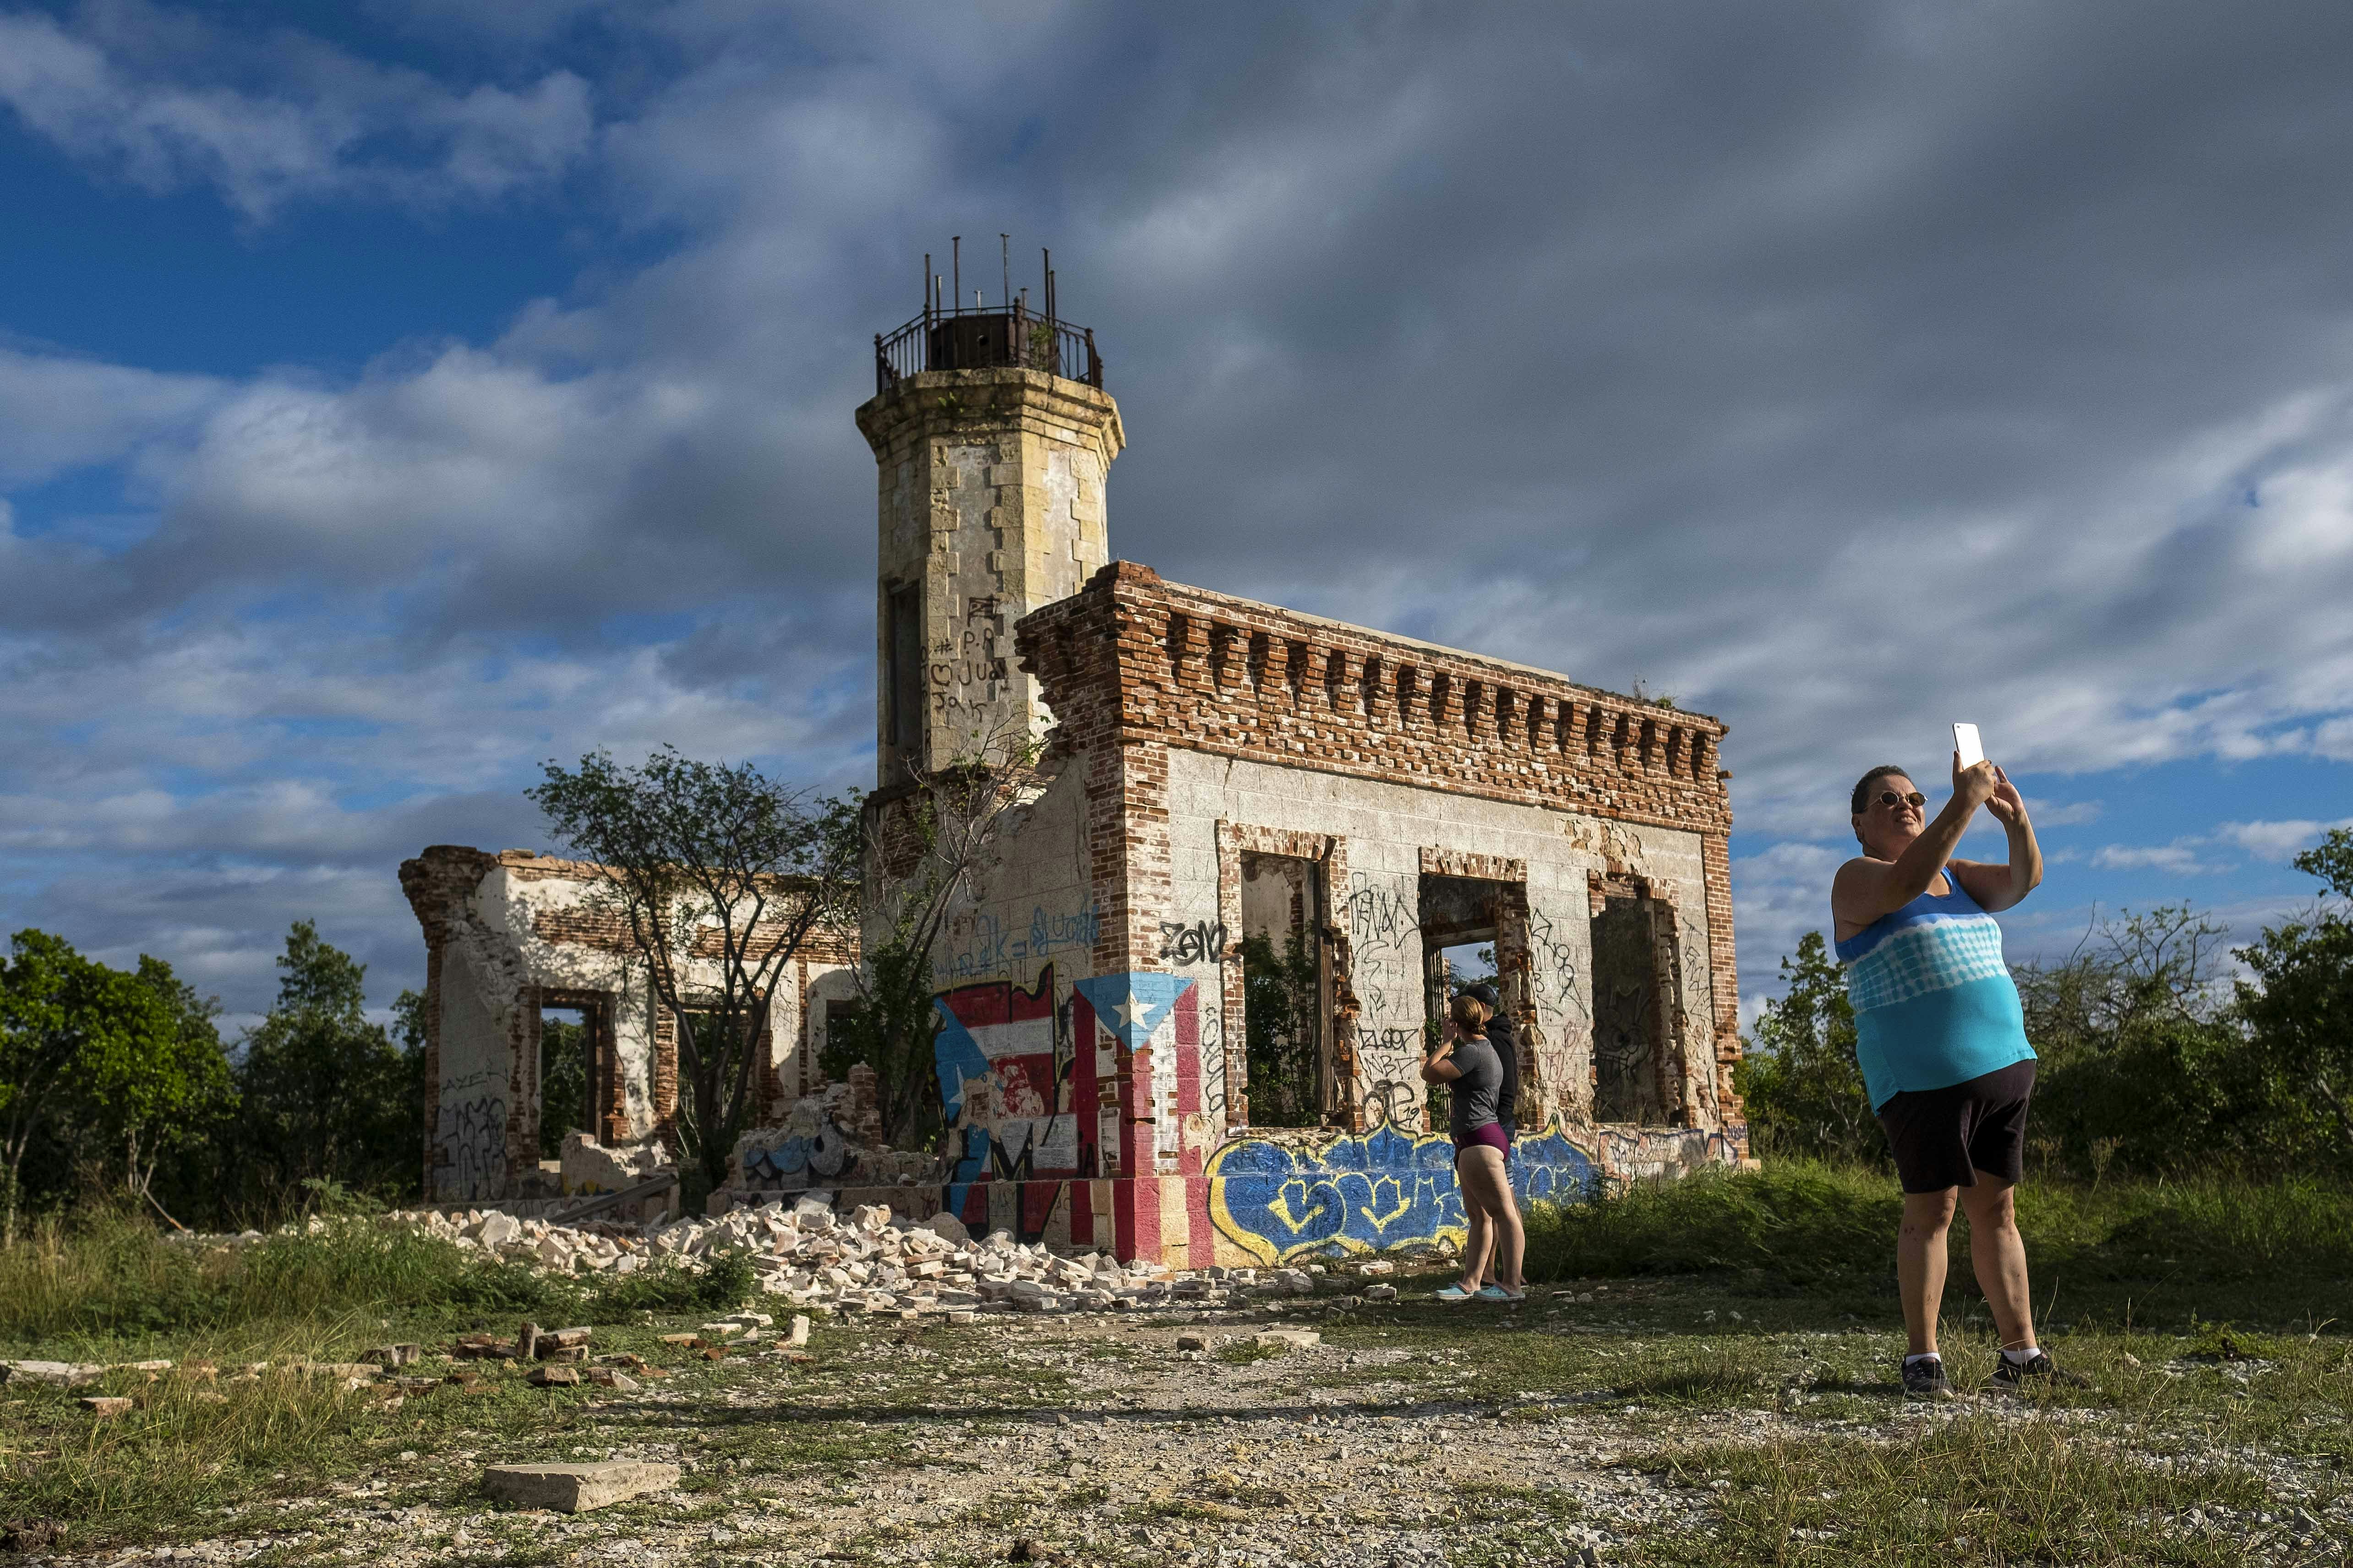 A tourist snaps a selfie at the ruins of the Guánica lighthouse, which was further damaged by the 2020 earthquakes in Puerto Rico